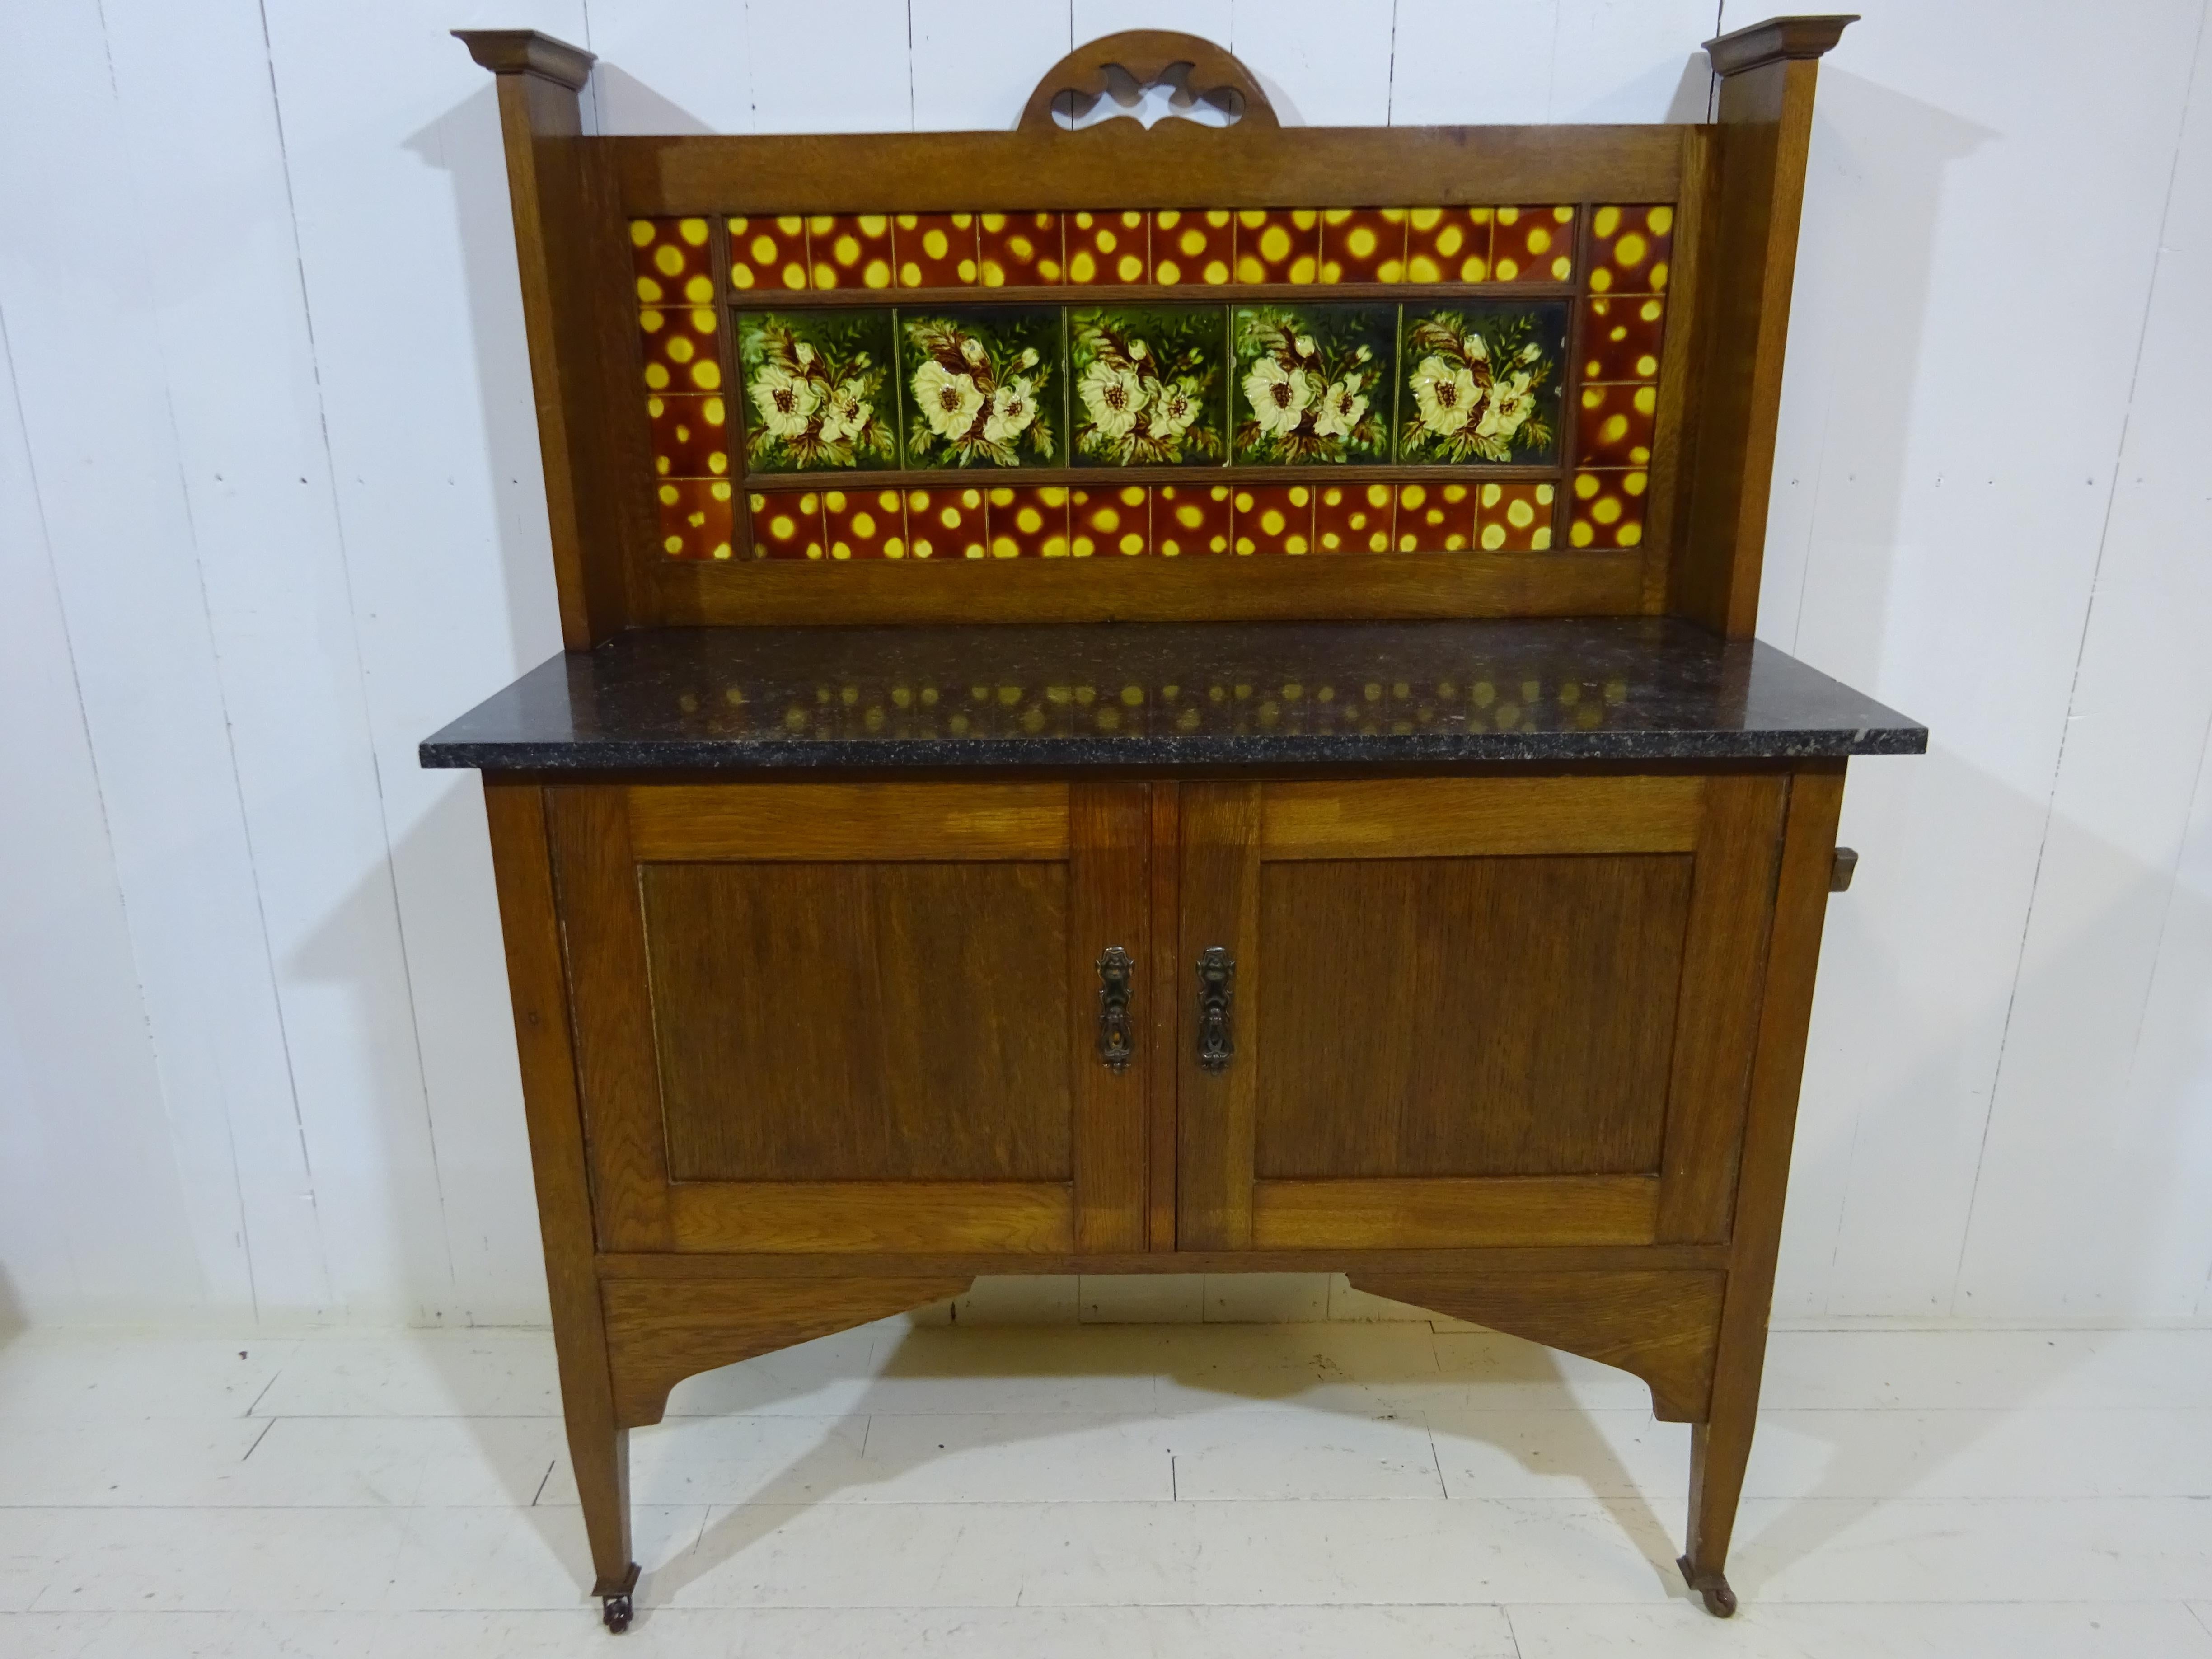 Hand-Crafted Victorian Marble Top Wash Stand in Oak with Floral Glazed Tiles